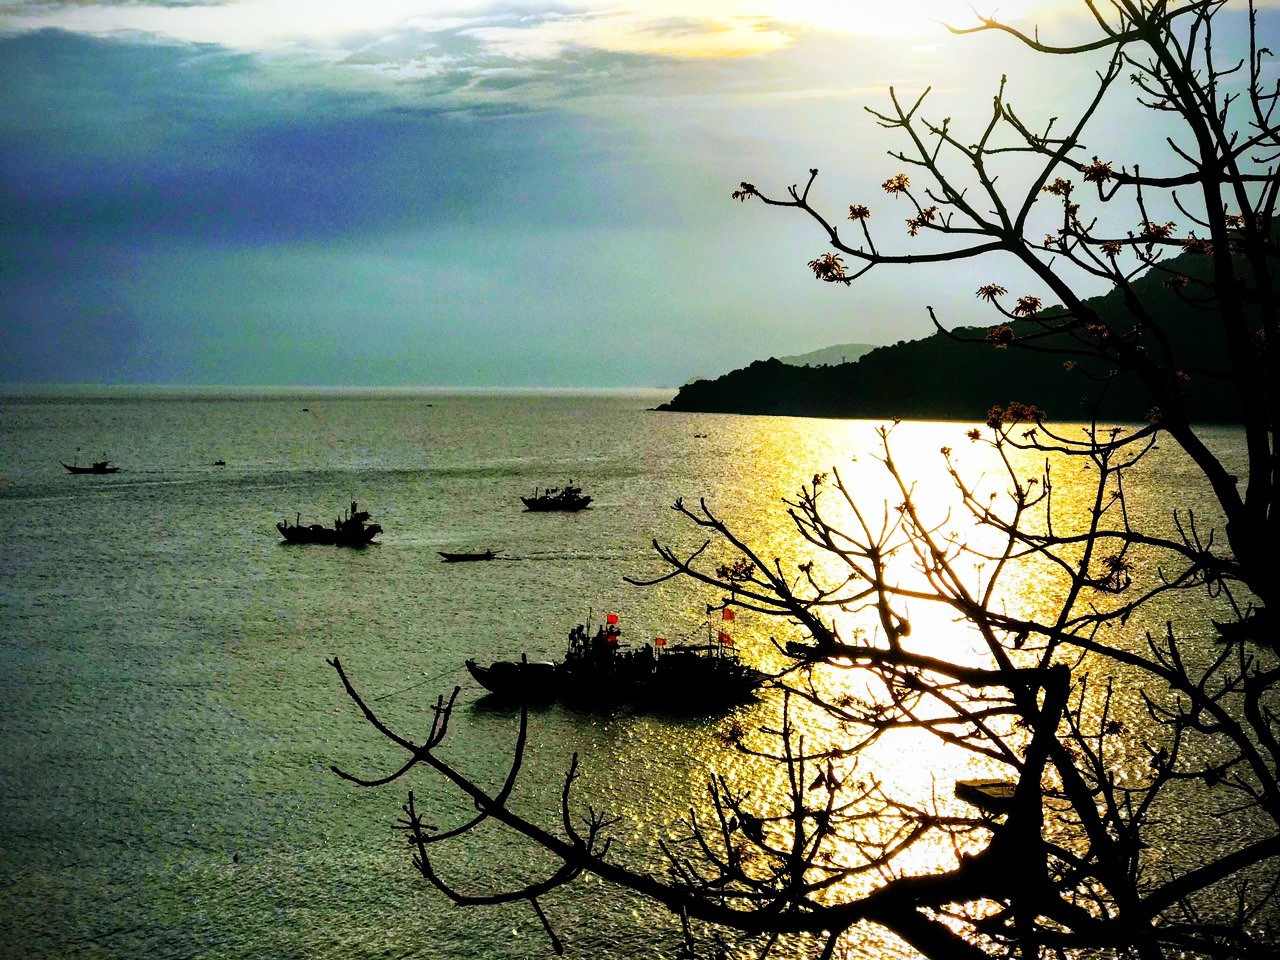 Going to Cham Islands during the festival, visitors have chances to admire the beauty of Firmiana Simplex flowers, contemplate the sunrise and sunset on the islands, immerse themselves in the blue sea to see corals, visit natural landscapes, and enjoy fresh seafood there.